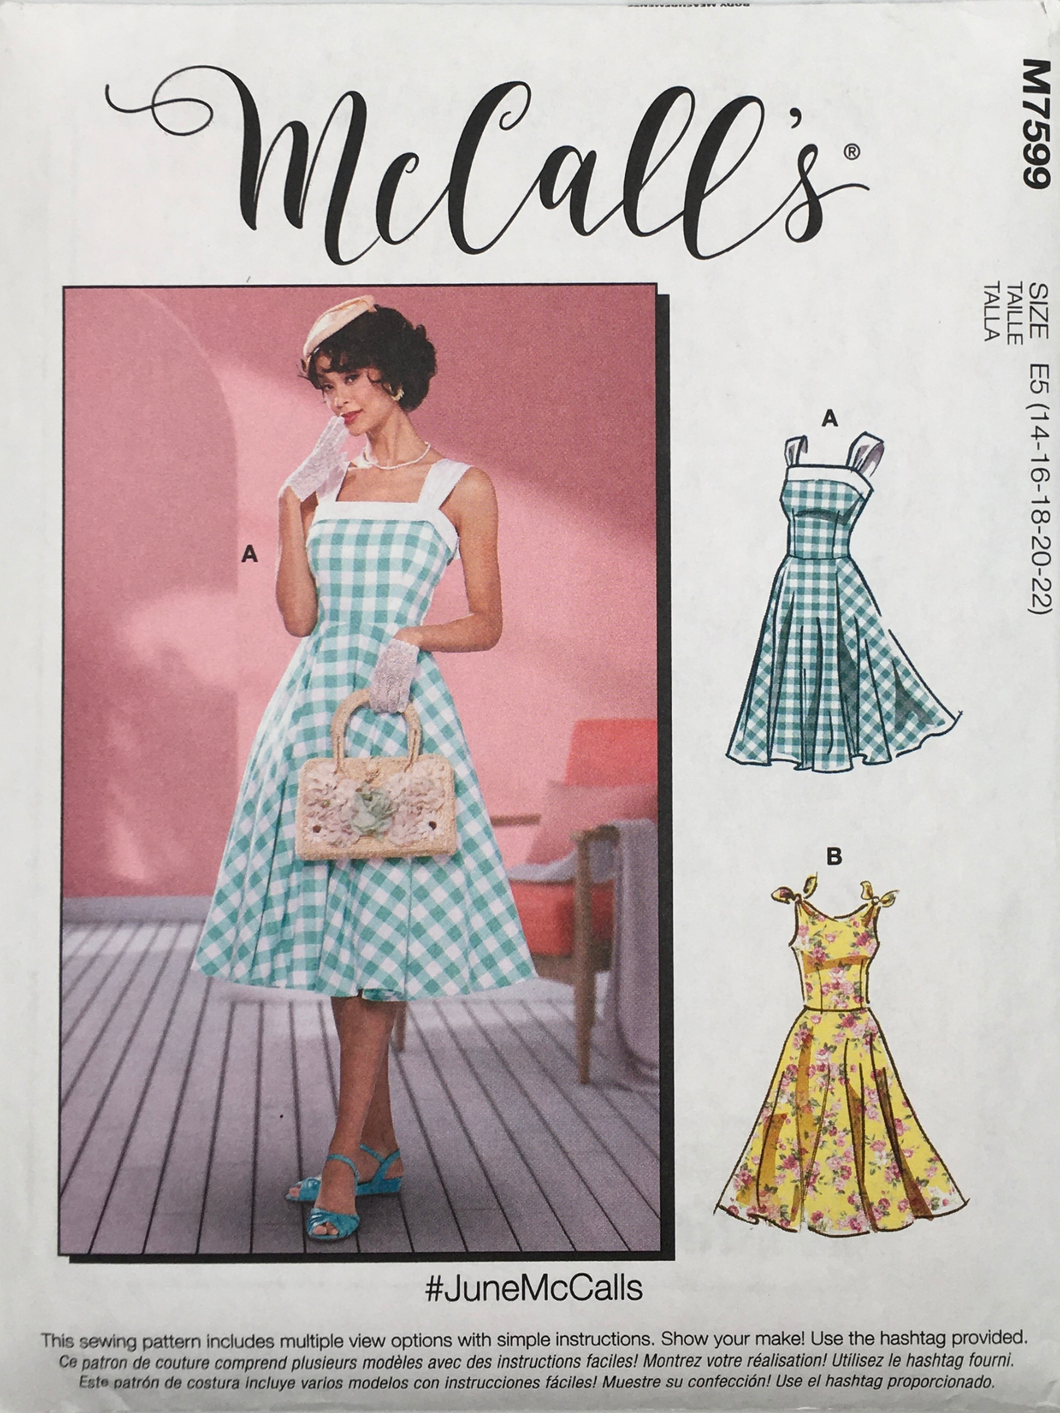 1953 Reproduction Sewing Pattern: McCalls M7599